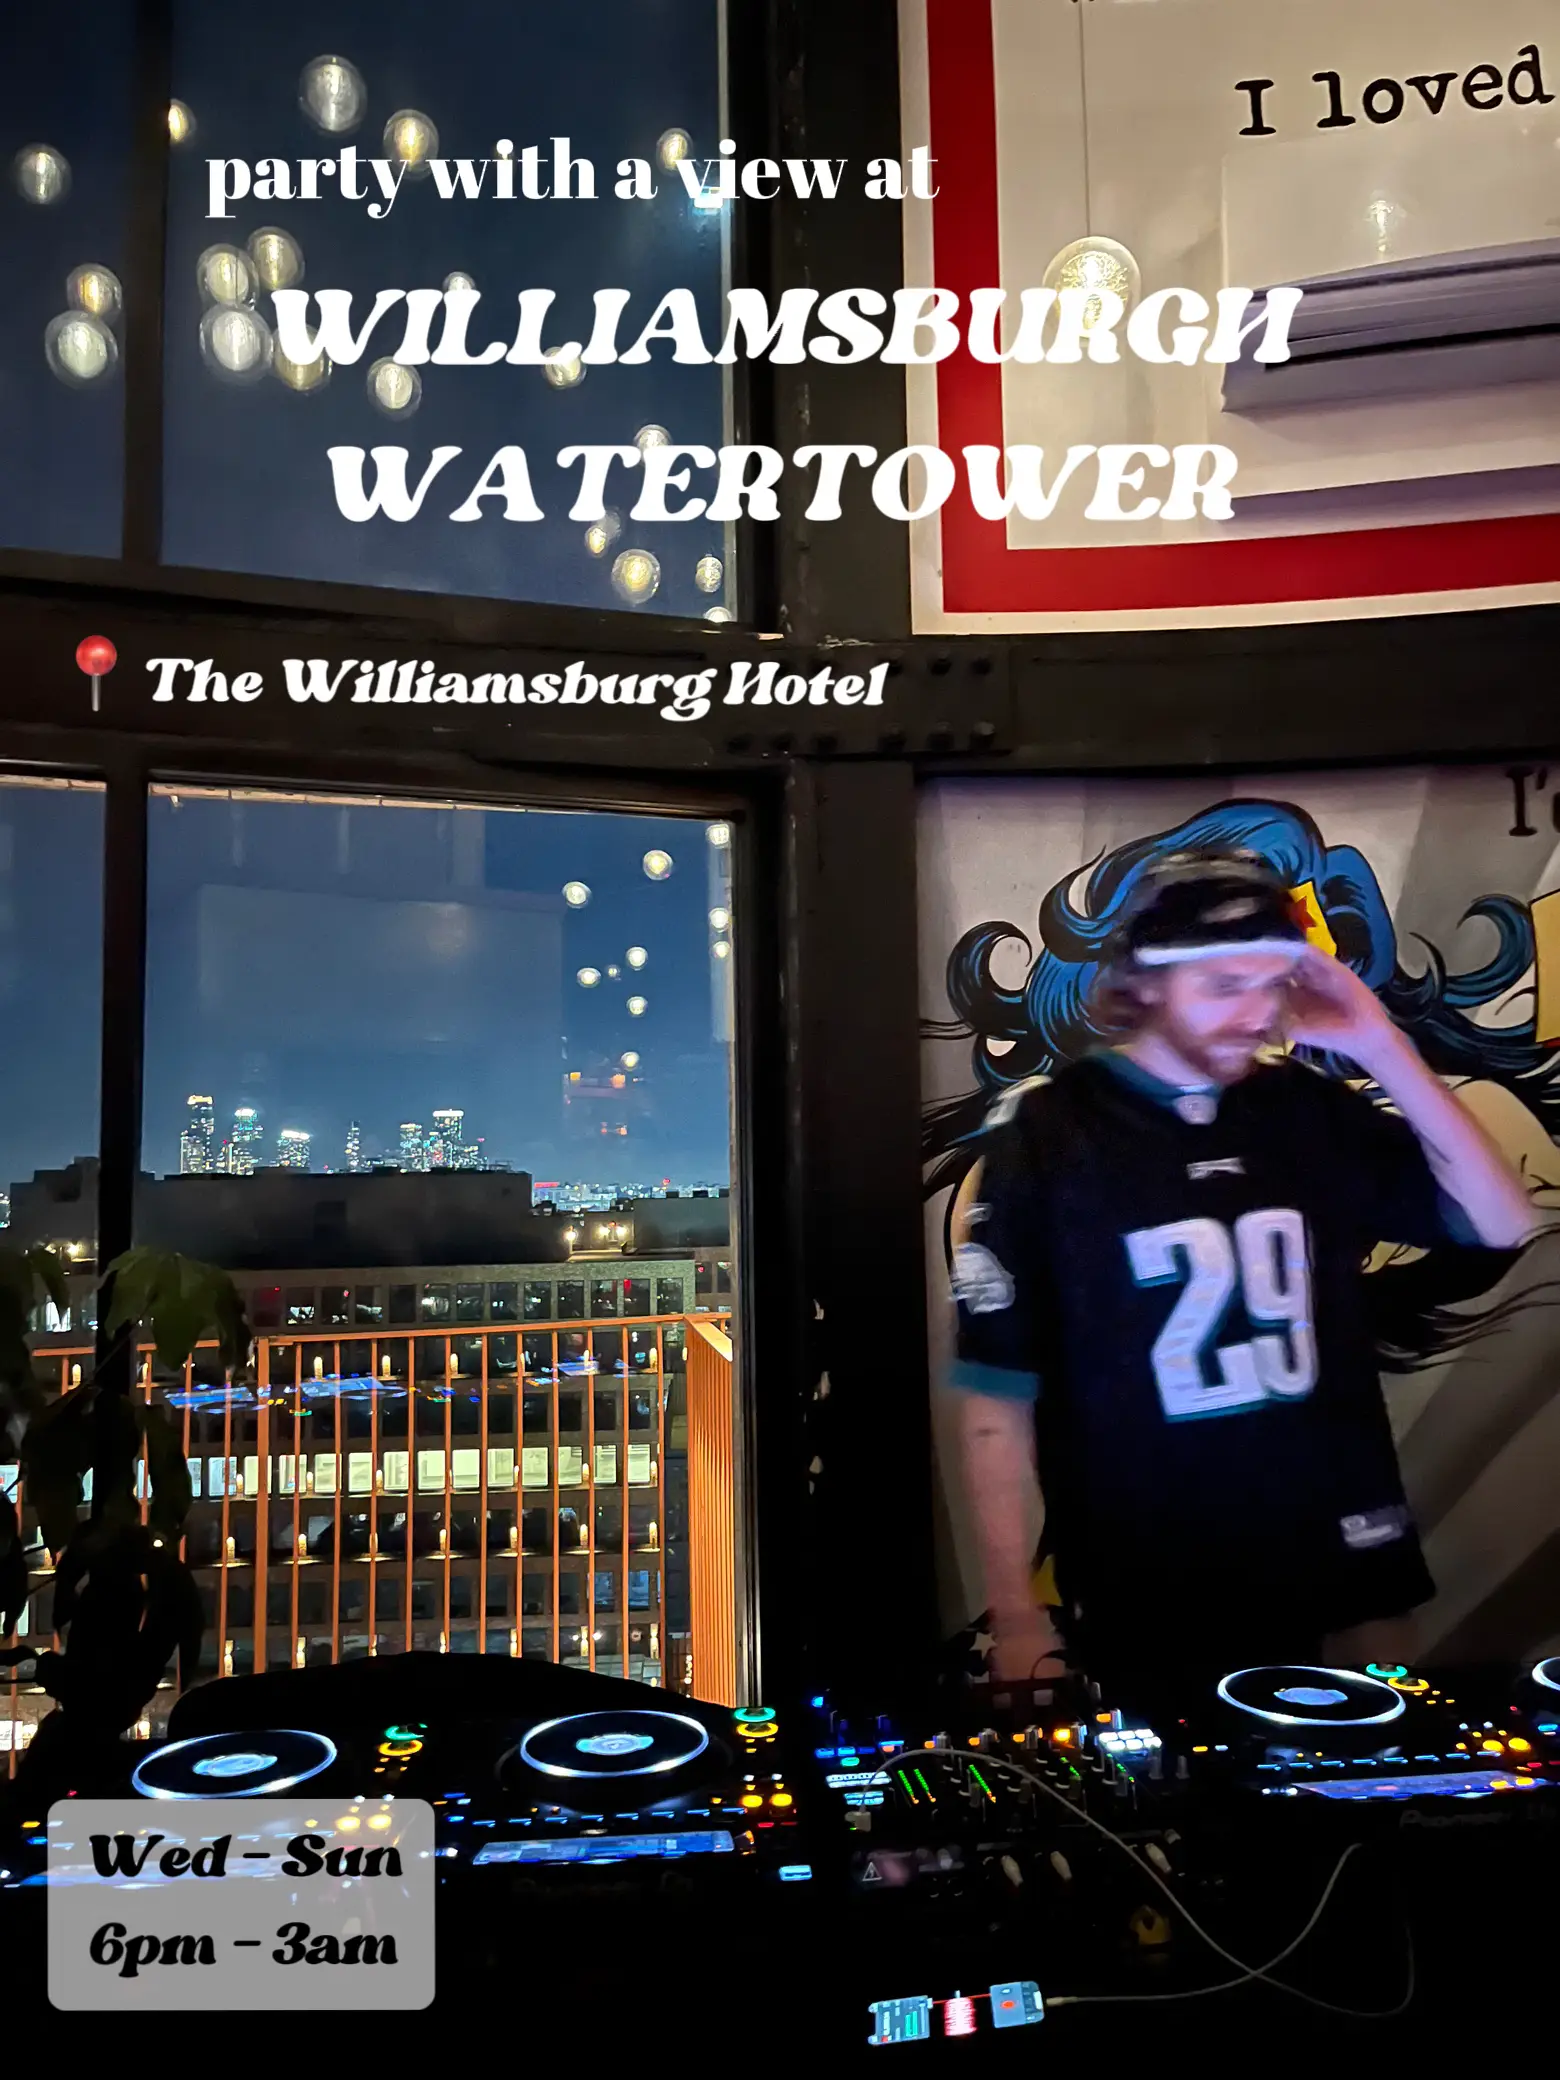  A man is DJing at the Williamburg Hotel and Water tower.